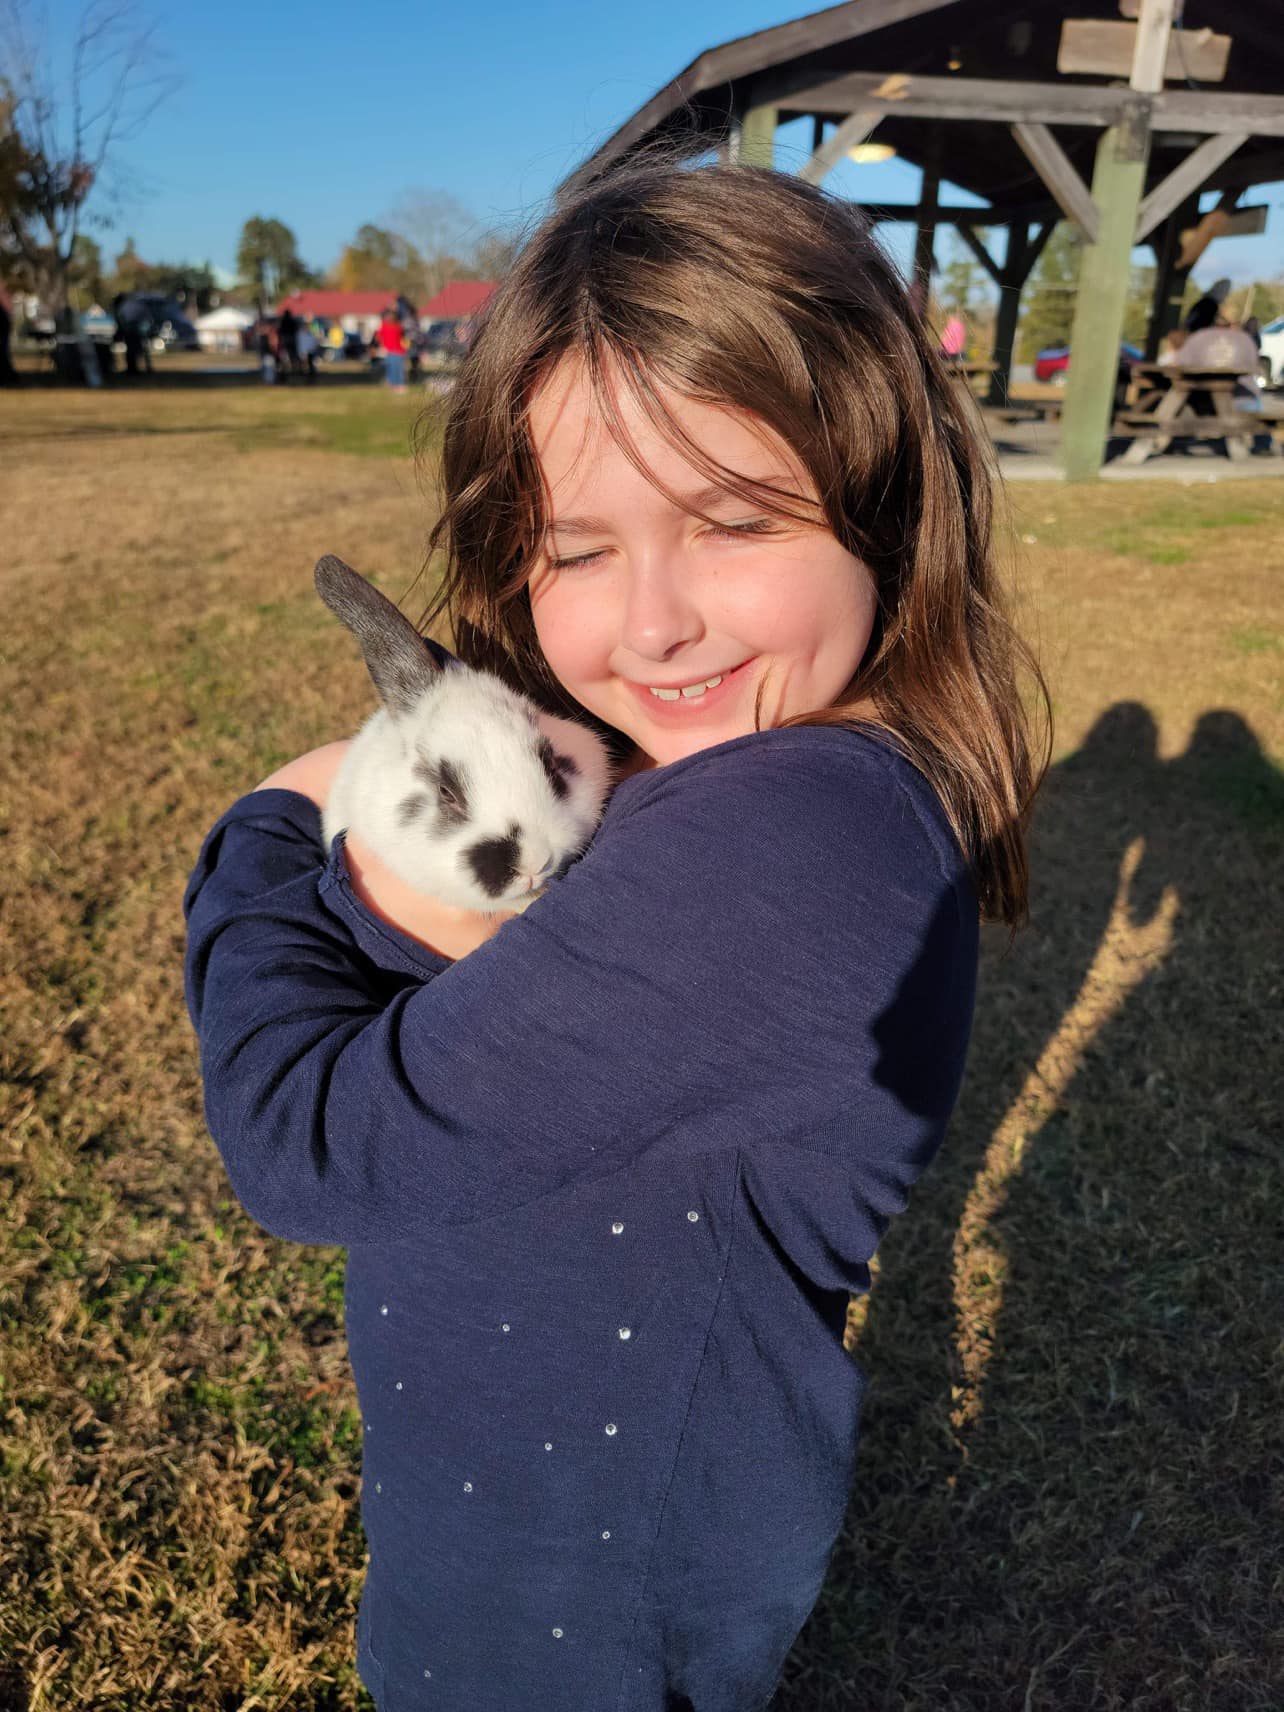 Student smiling with a rabbit